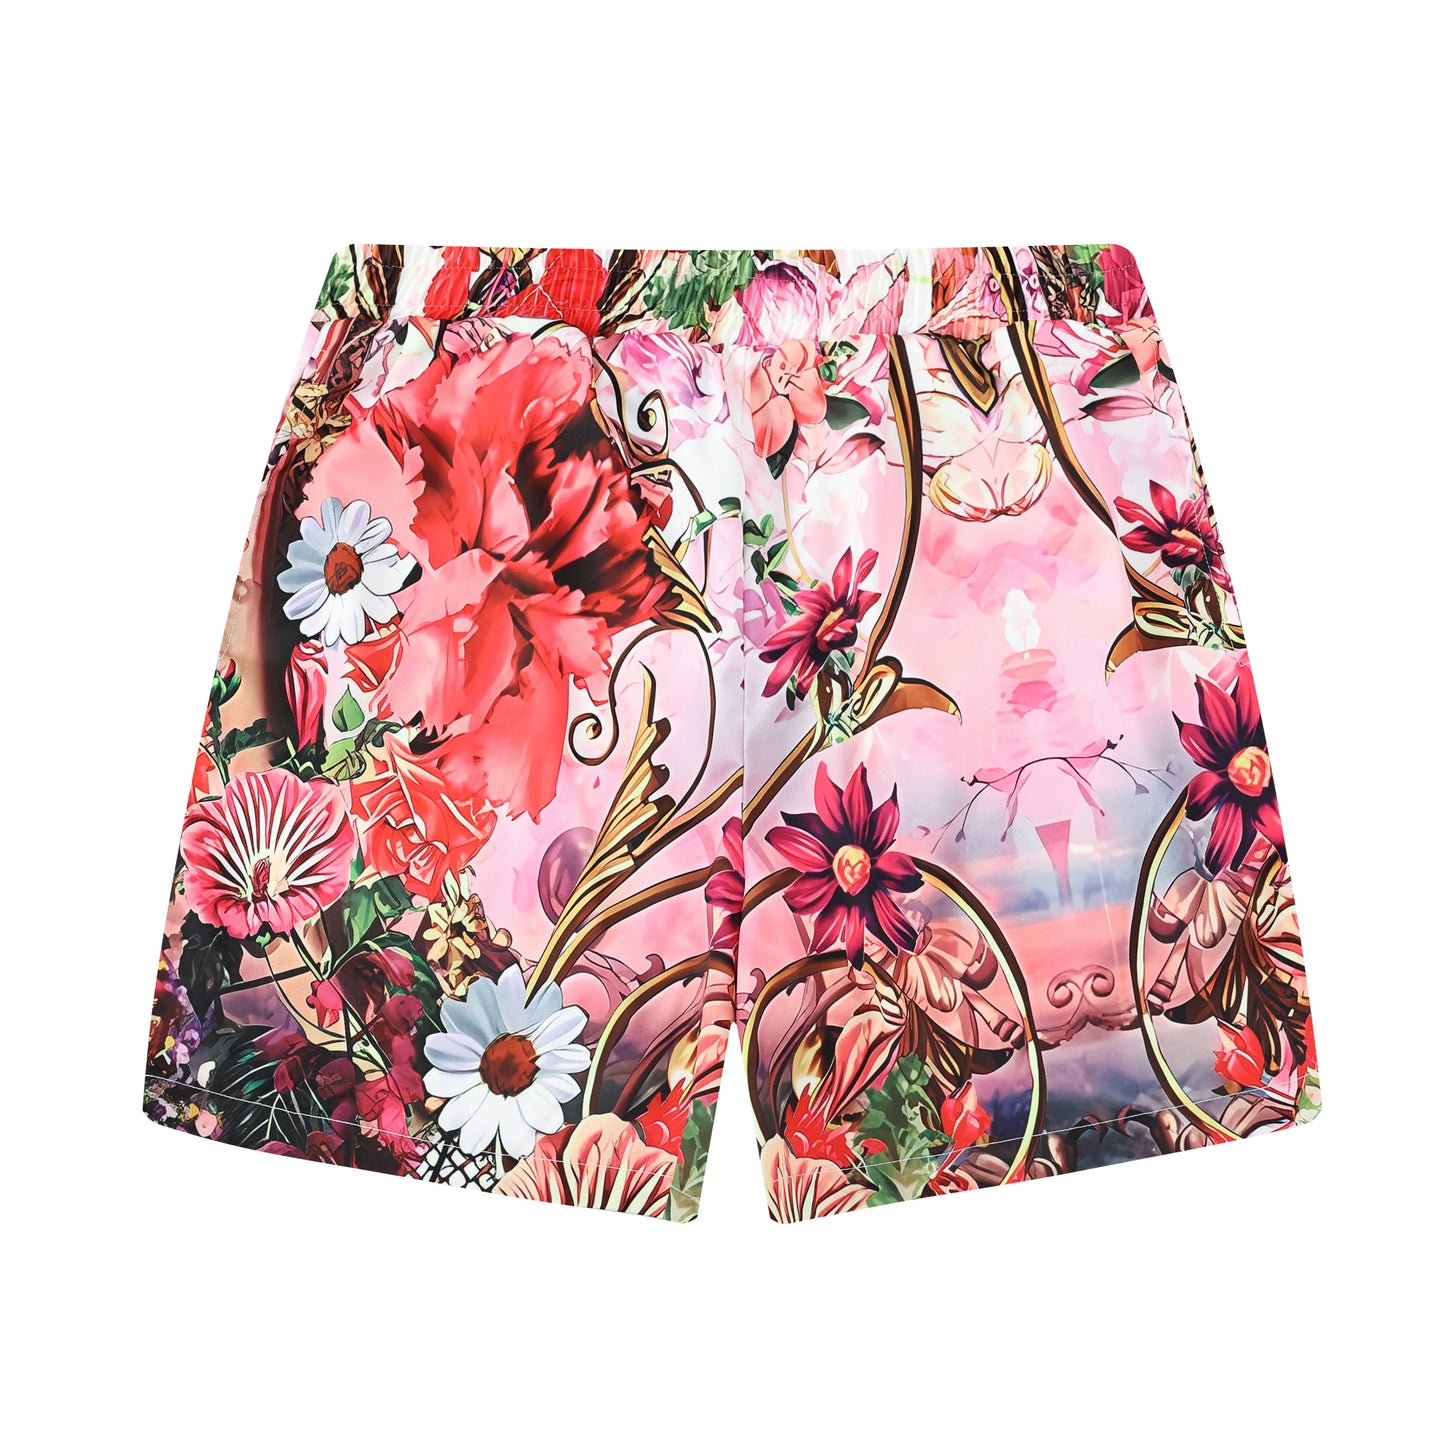 Floral Blossom Pattern Printed Waistband Shorts